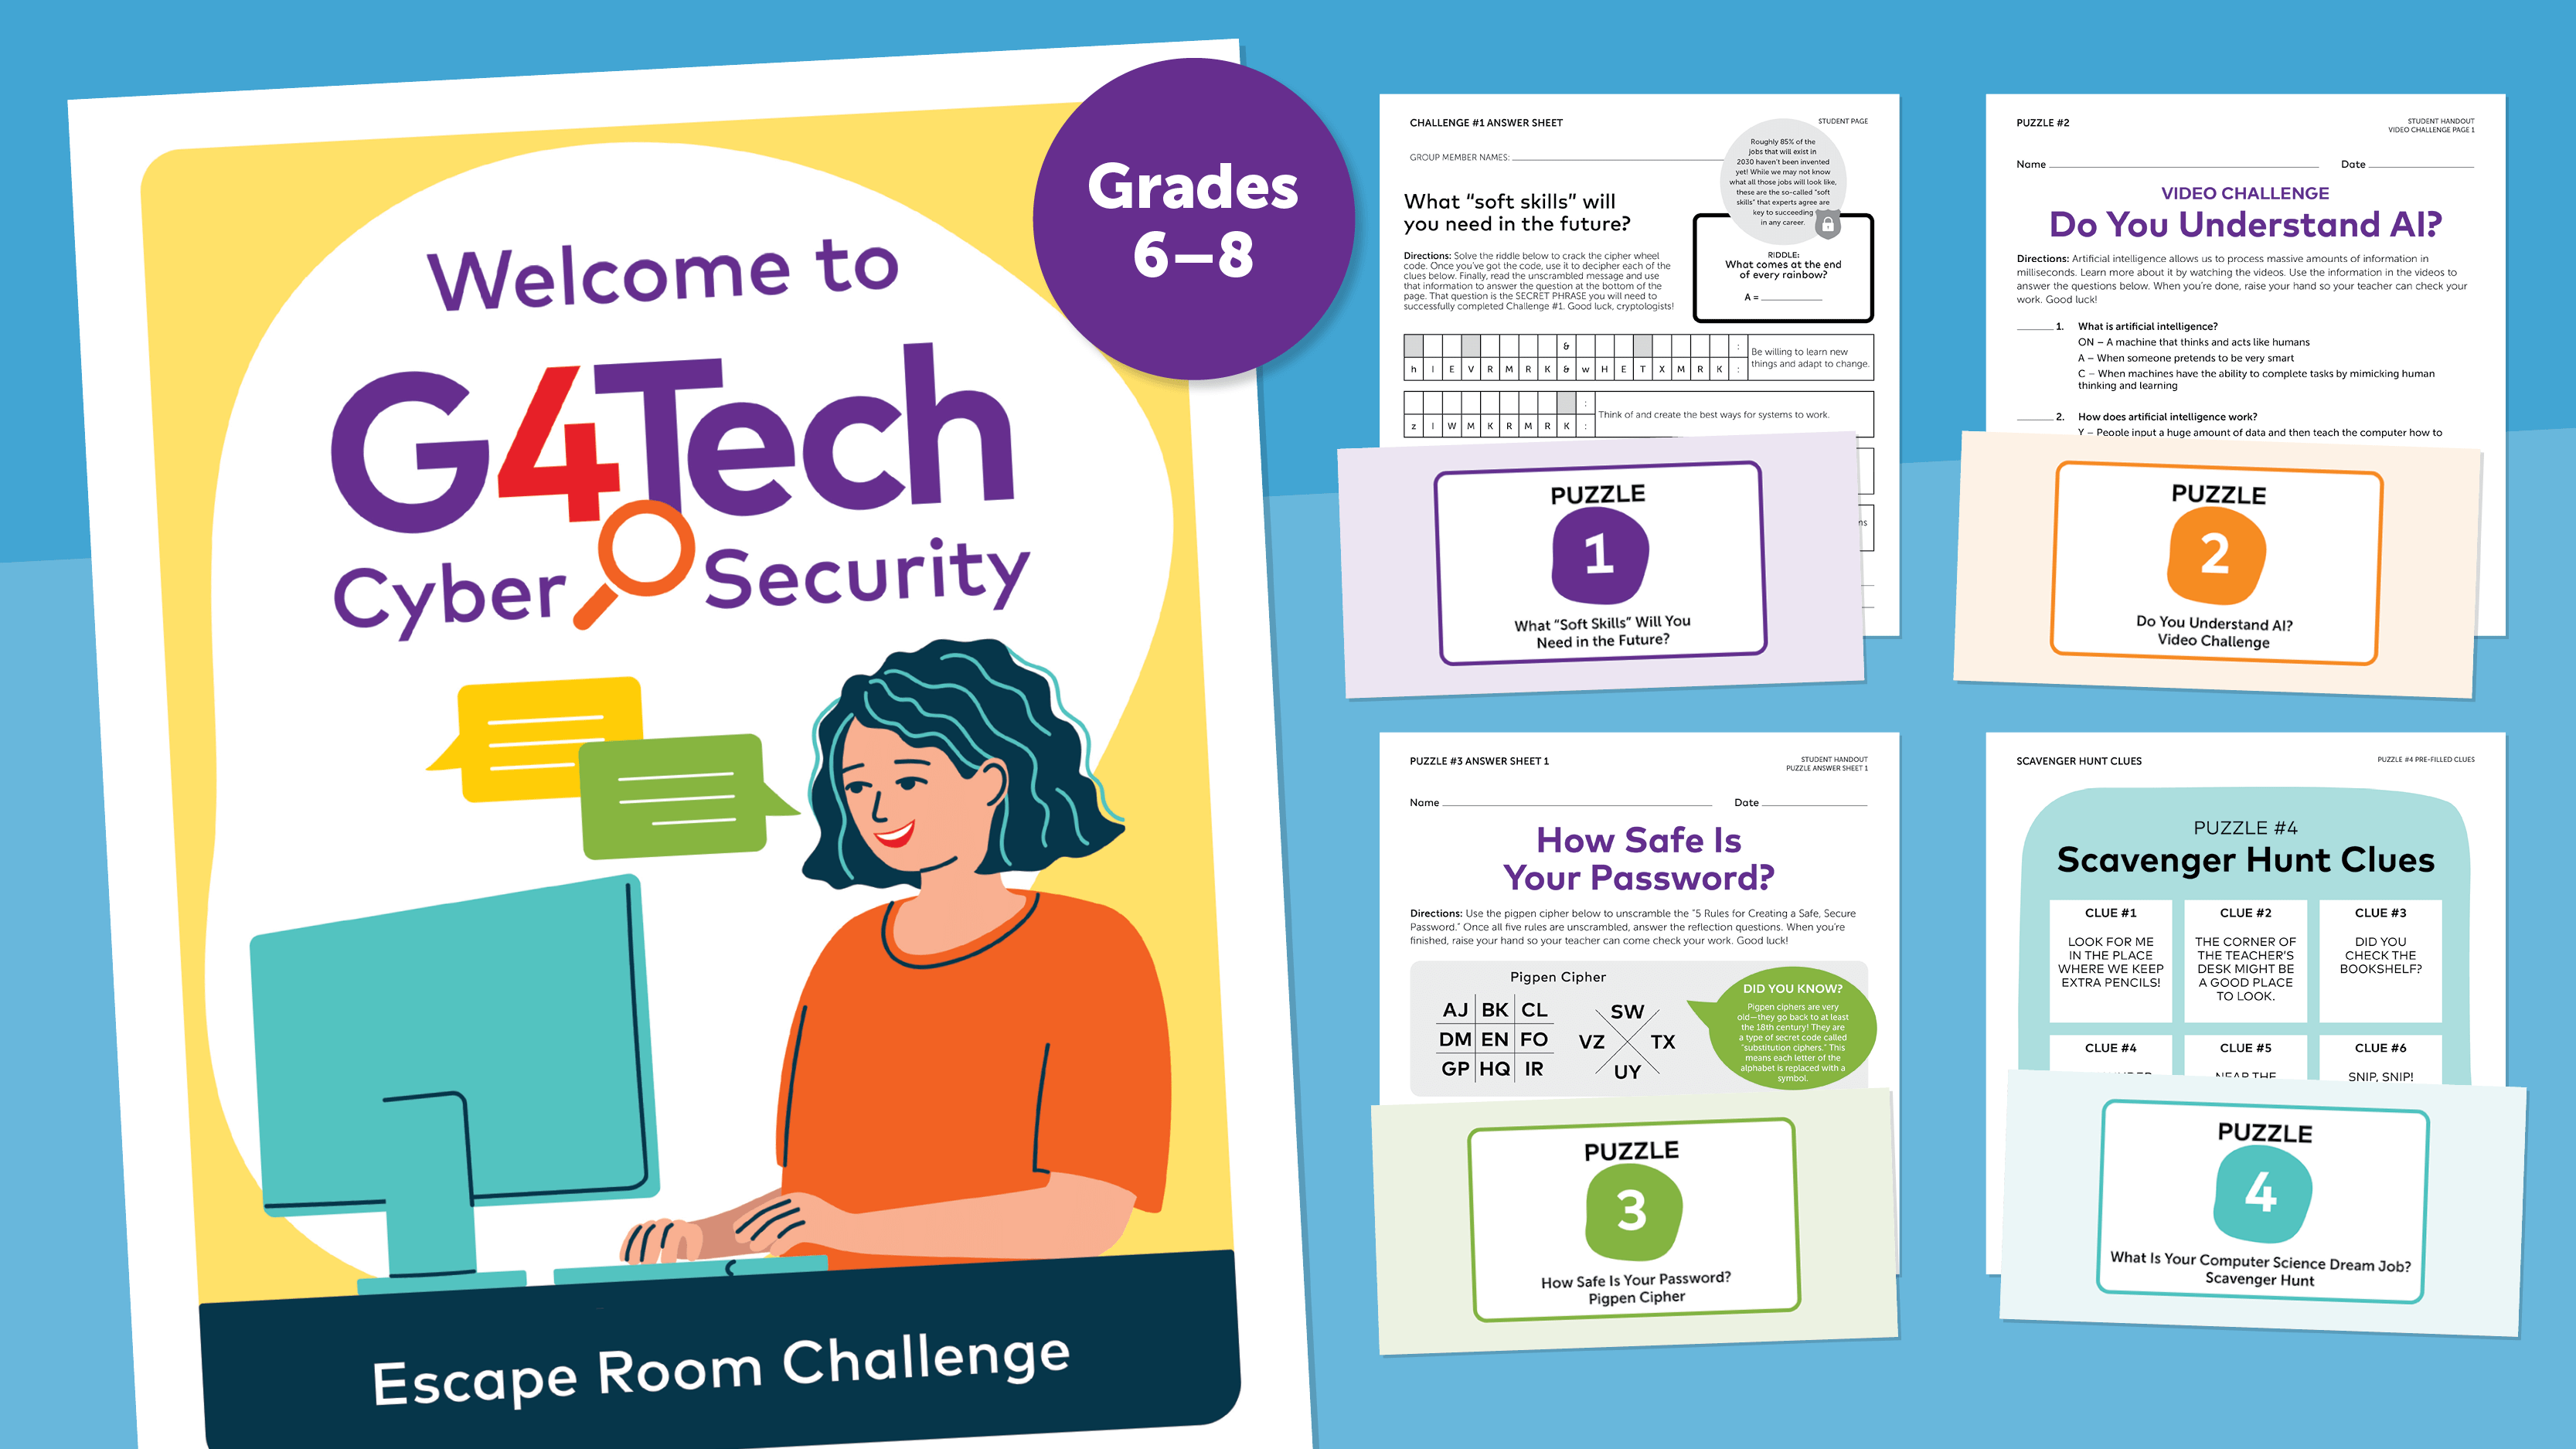 This Free Escape Room Plan Will Turn Your Students Into Cyber Detectives.